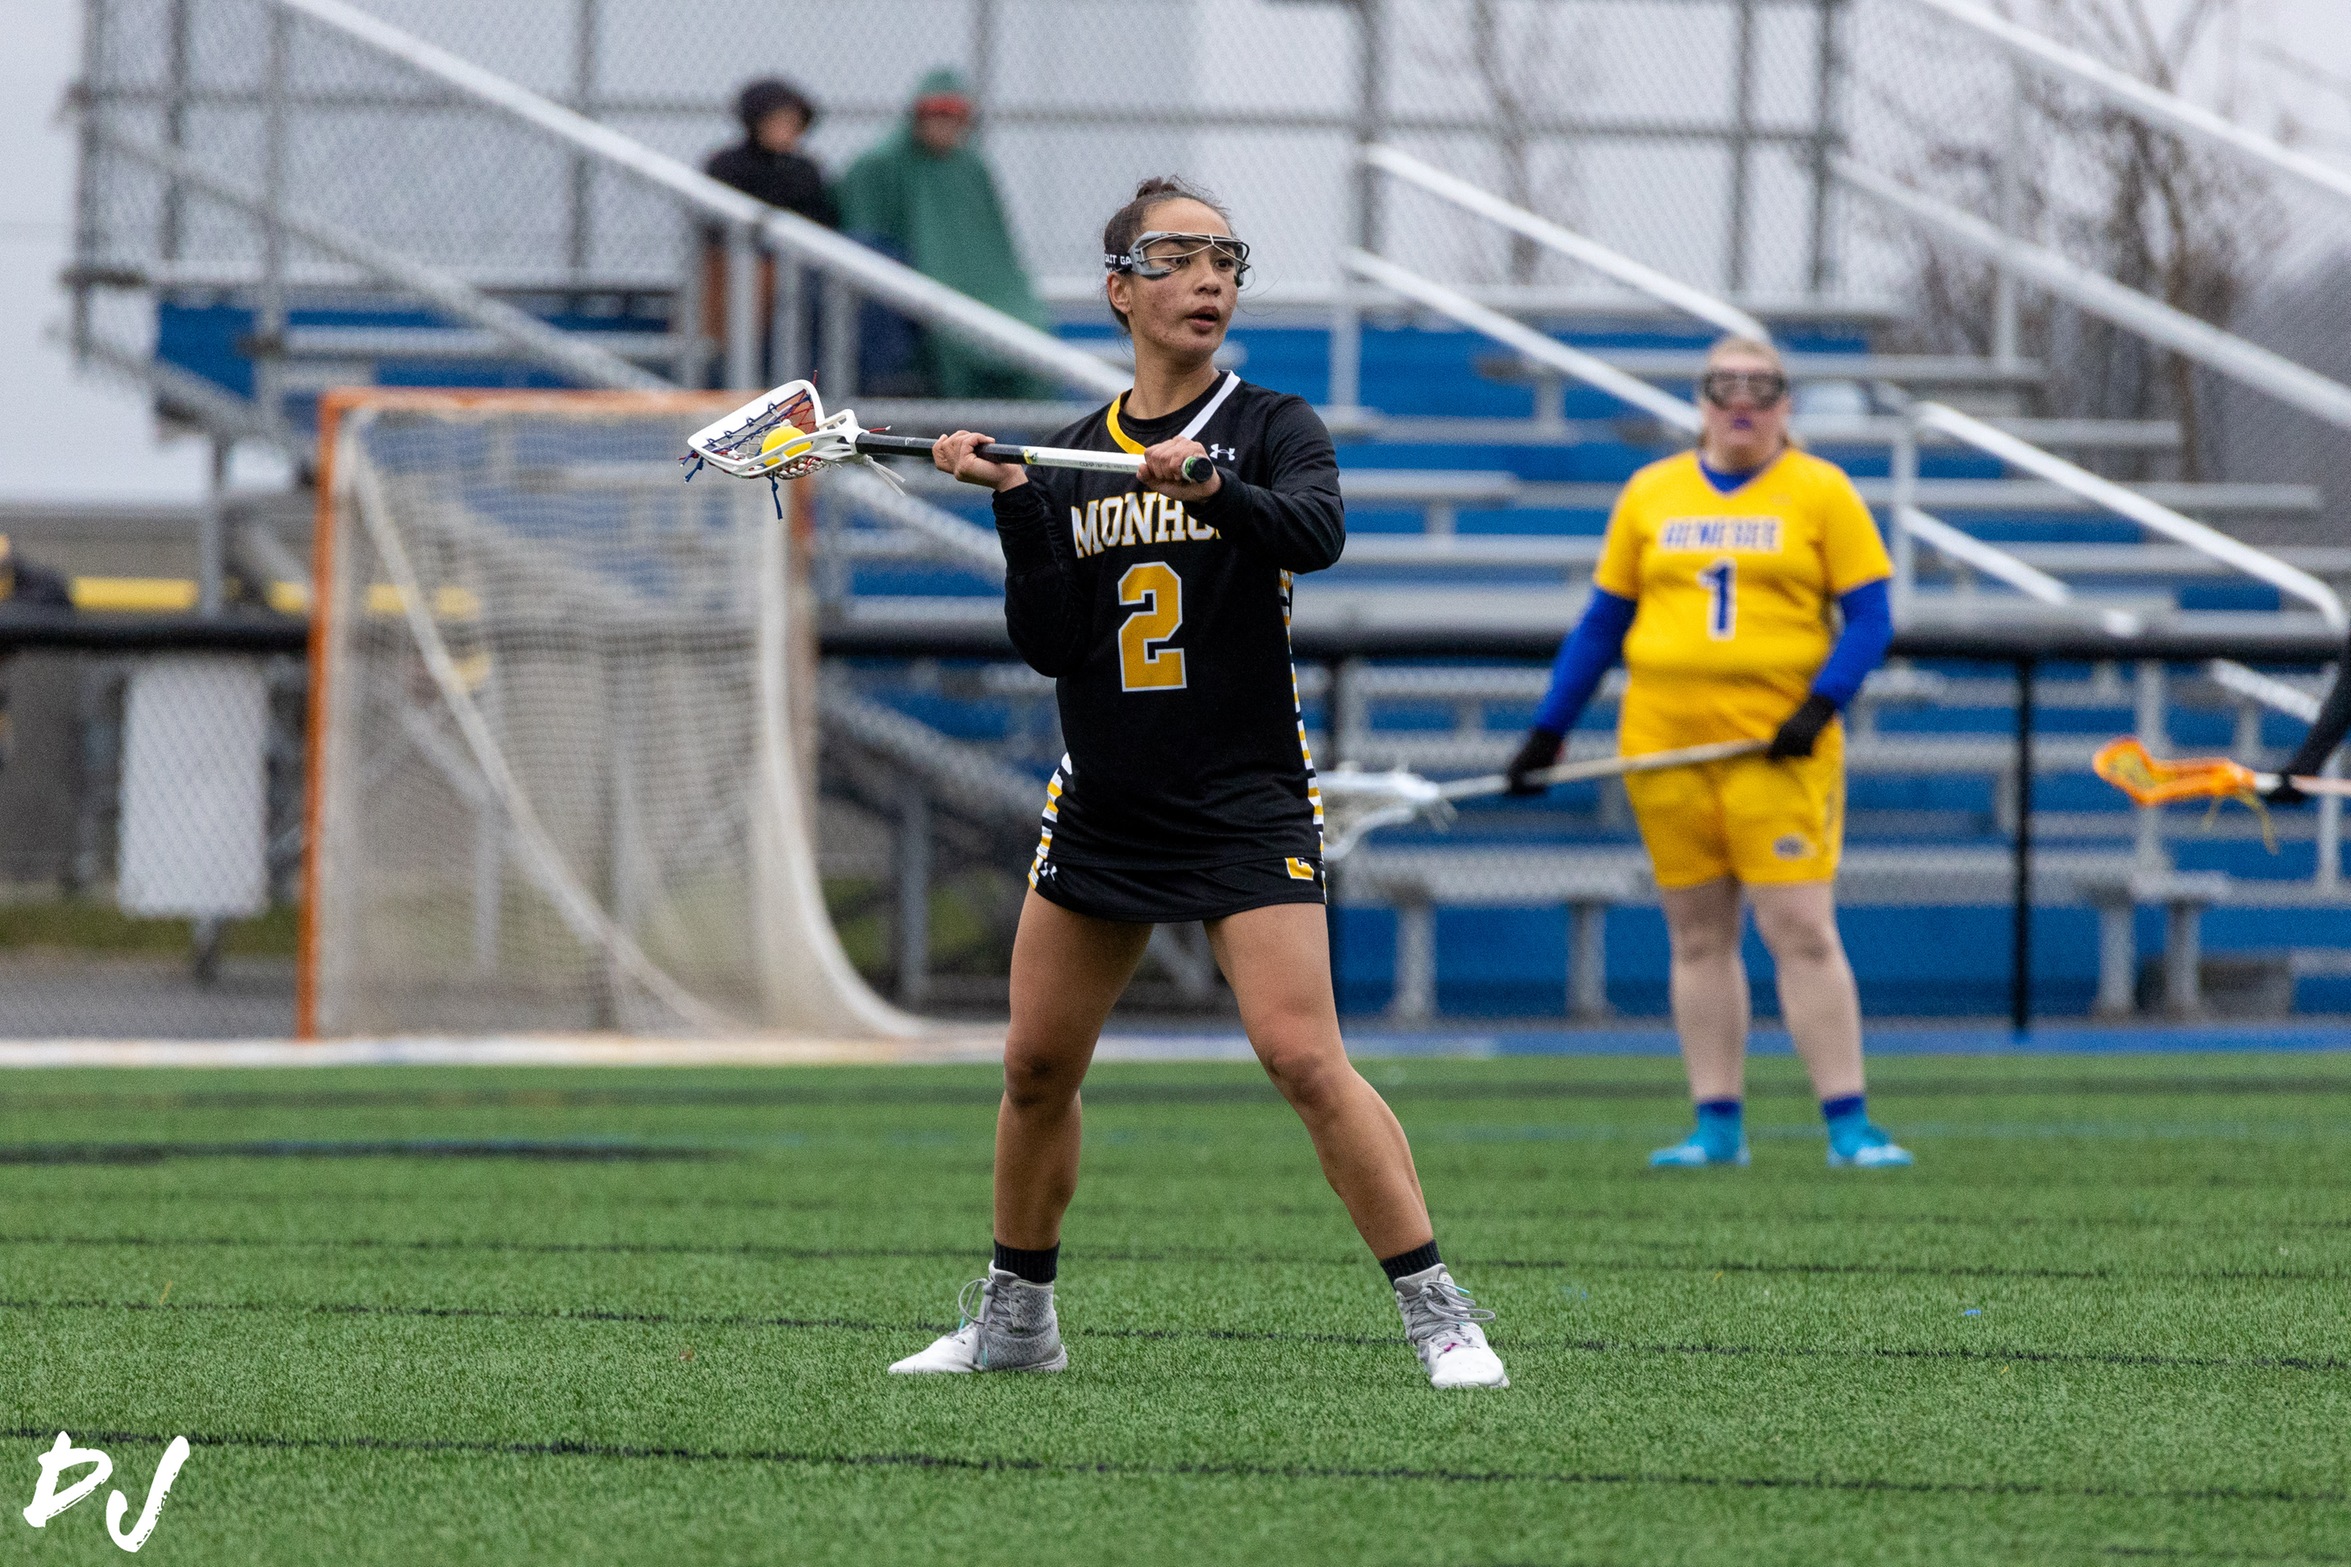 Gaudio Nets Her 100th Career Goal, Tribs Move to #2 National Ranking